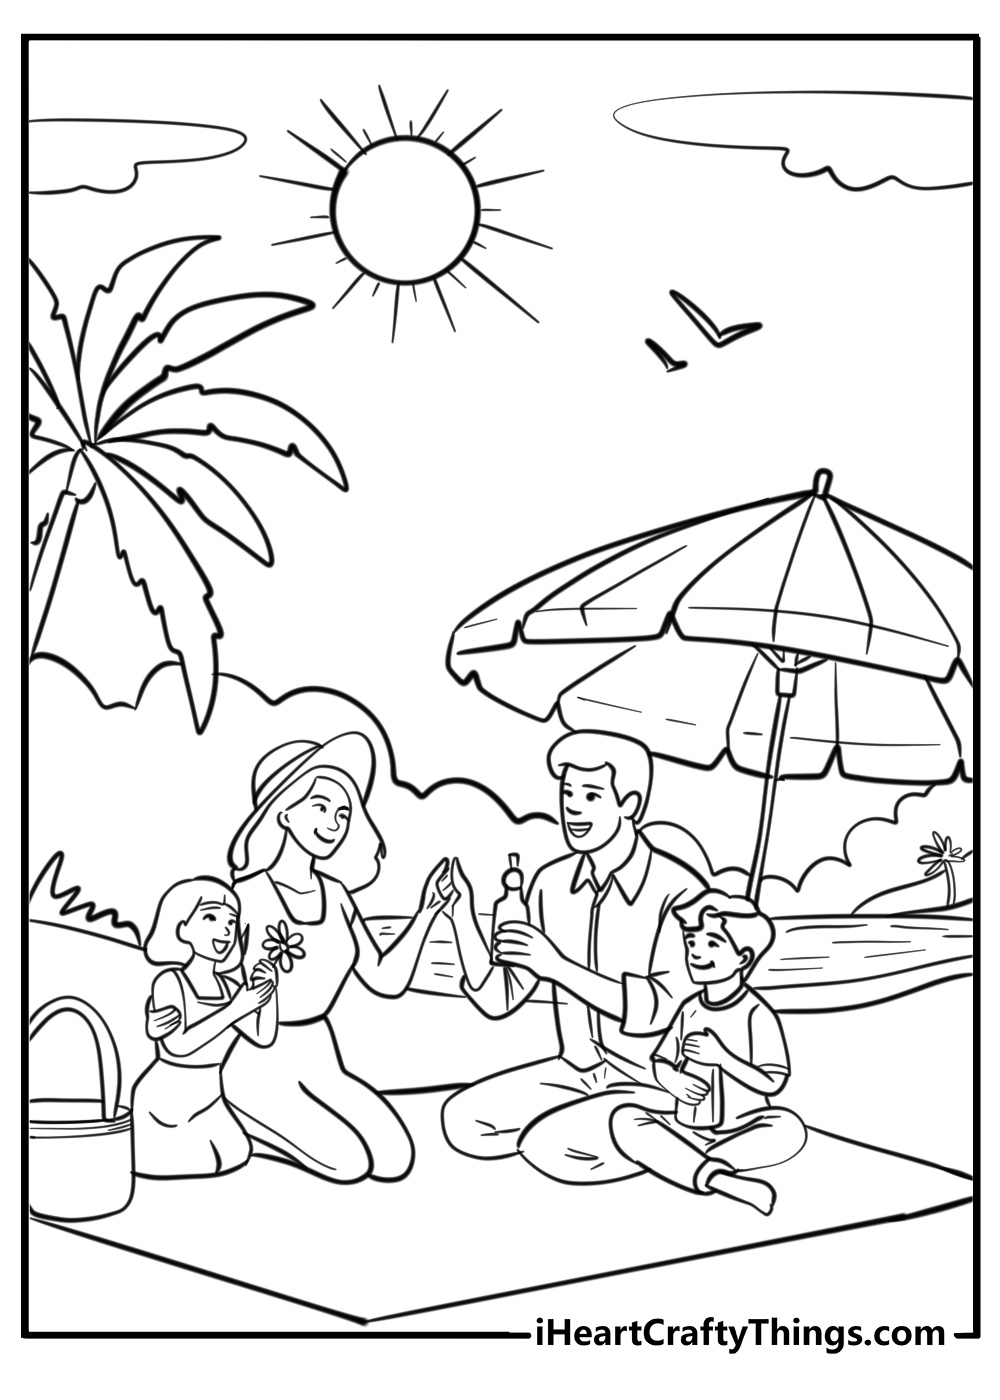 A family picnic with a palm tree in the background